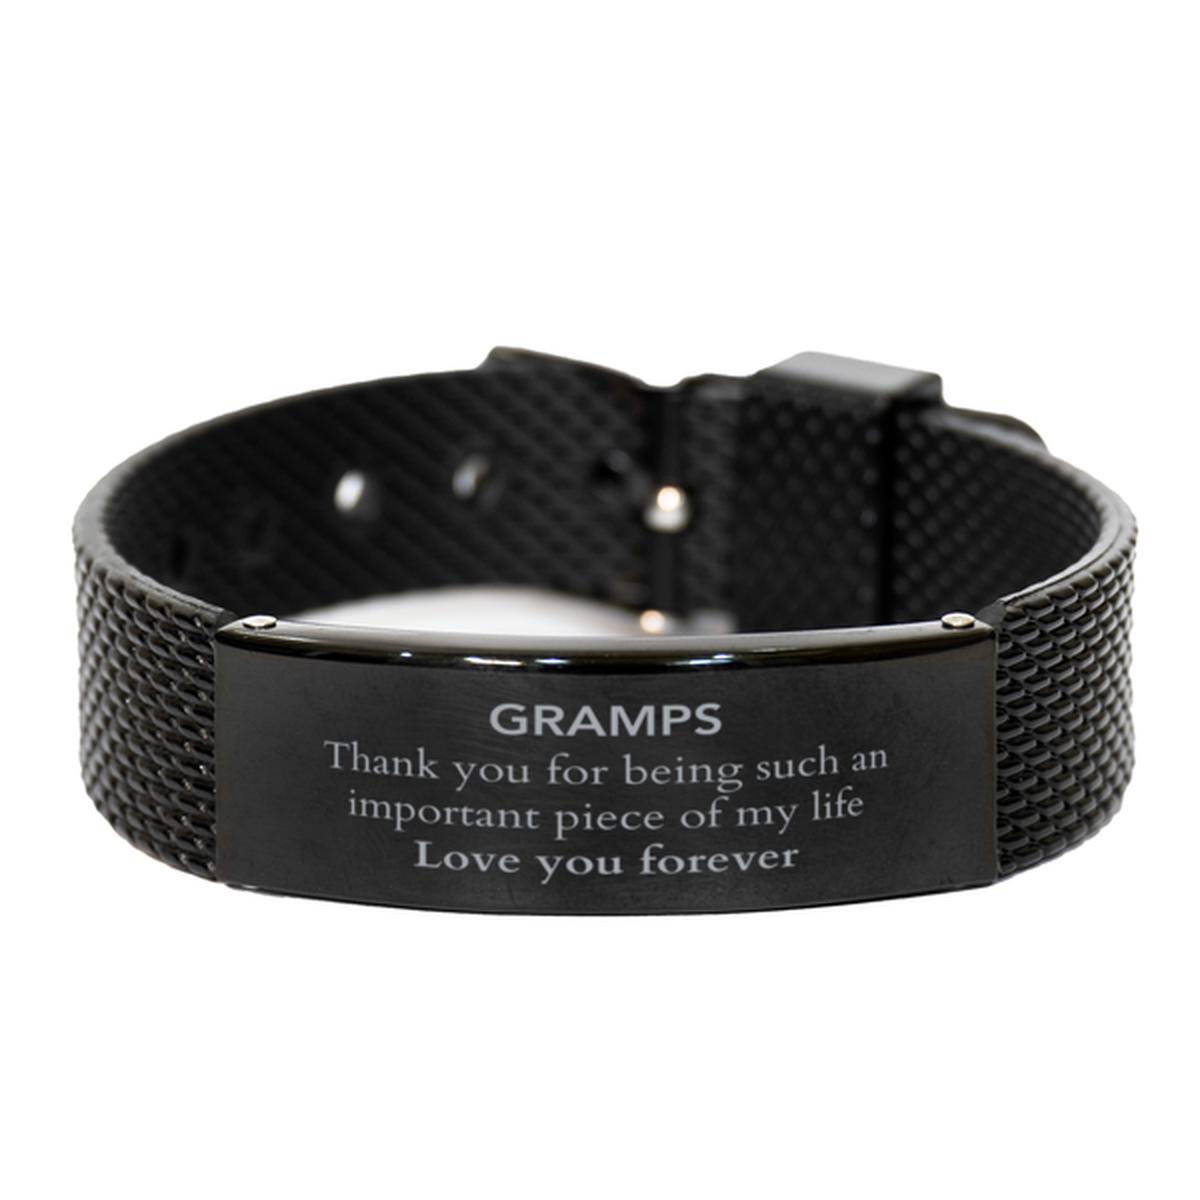 Appropriate Gramps Black Shark Mesh Bracelet Epic Birthday Gifts for Gramps Thank you for being such an important piece of my life Gramps Christmas Mothers Fathers Day